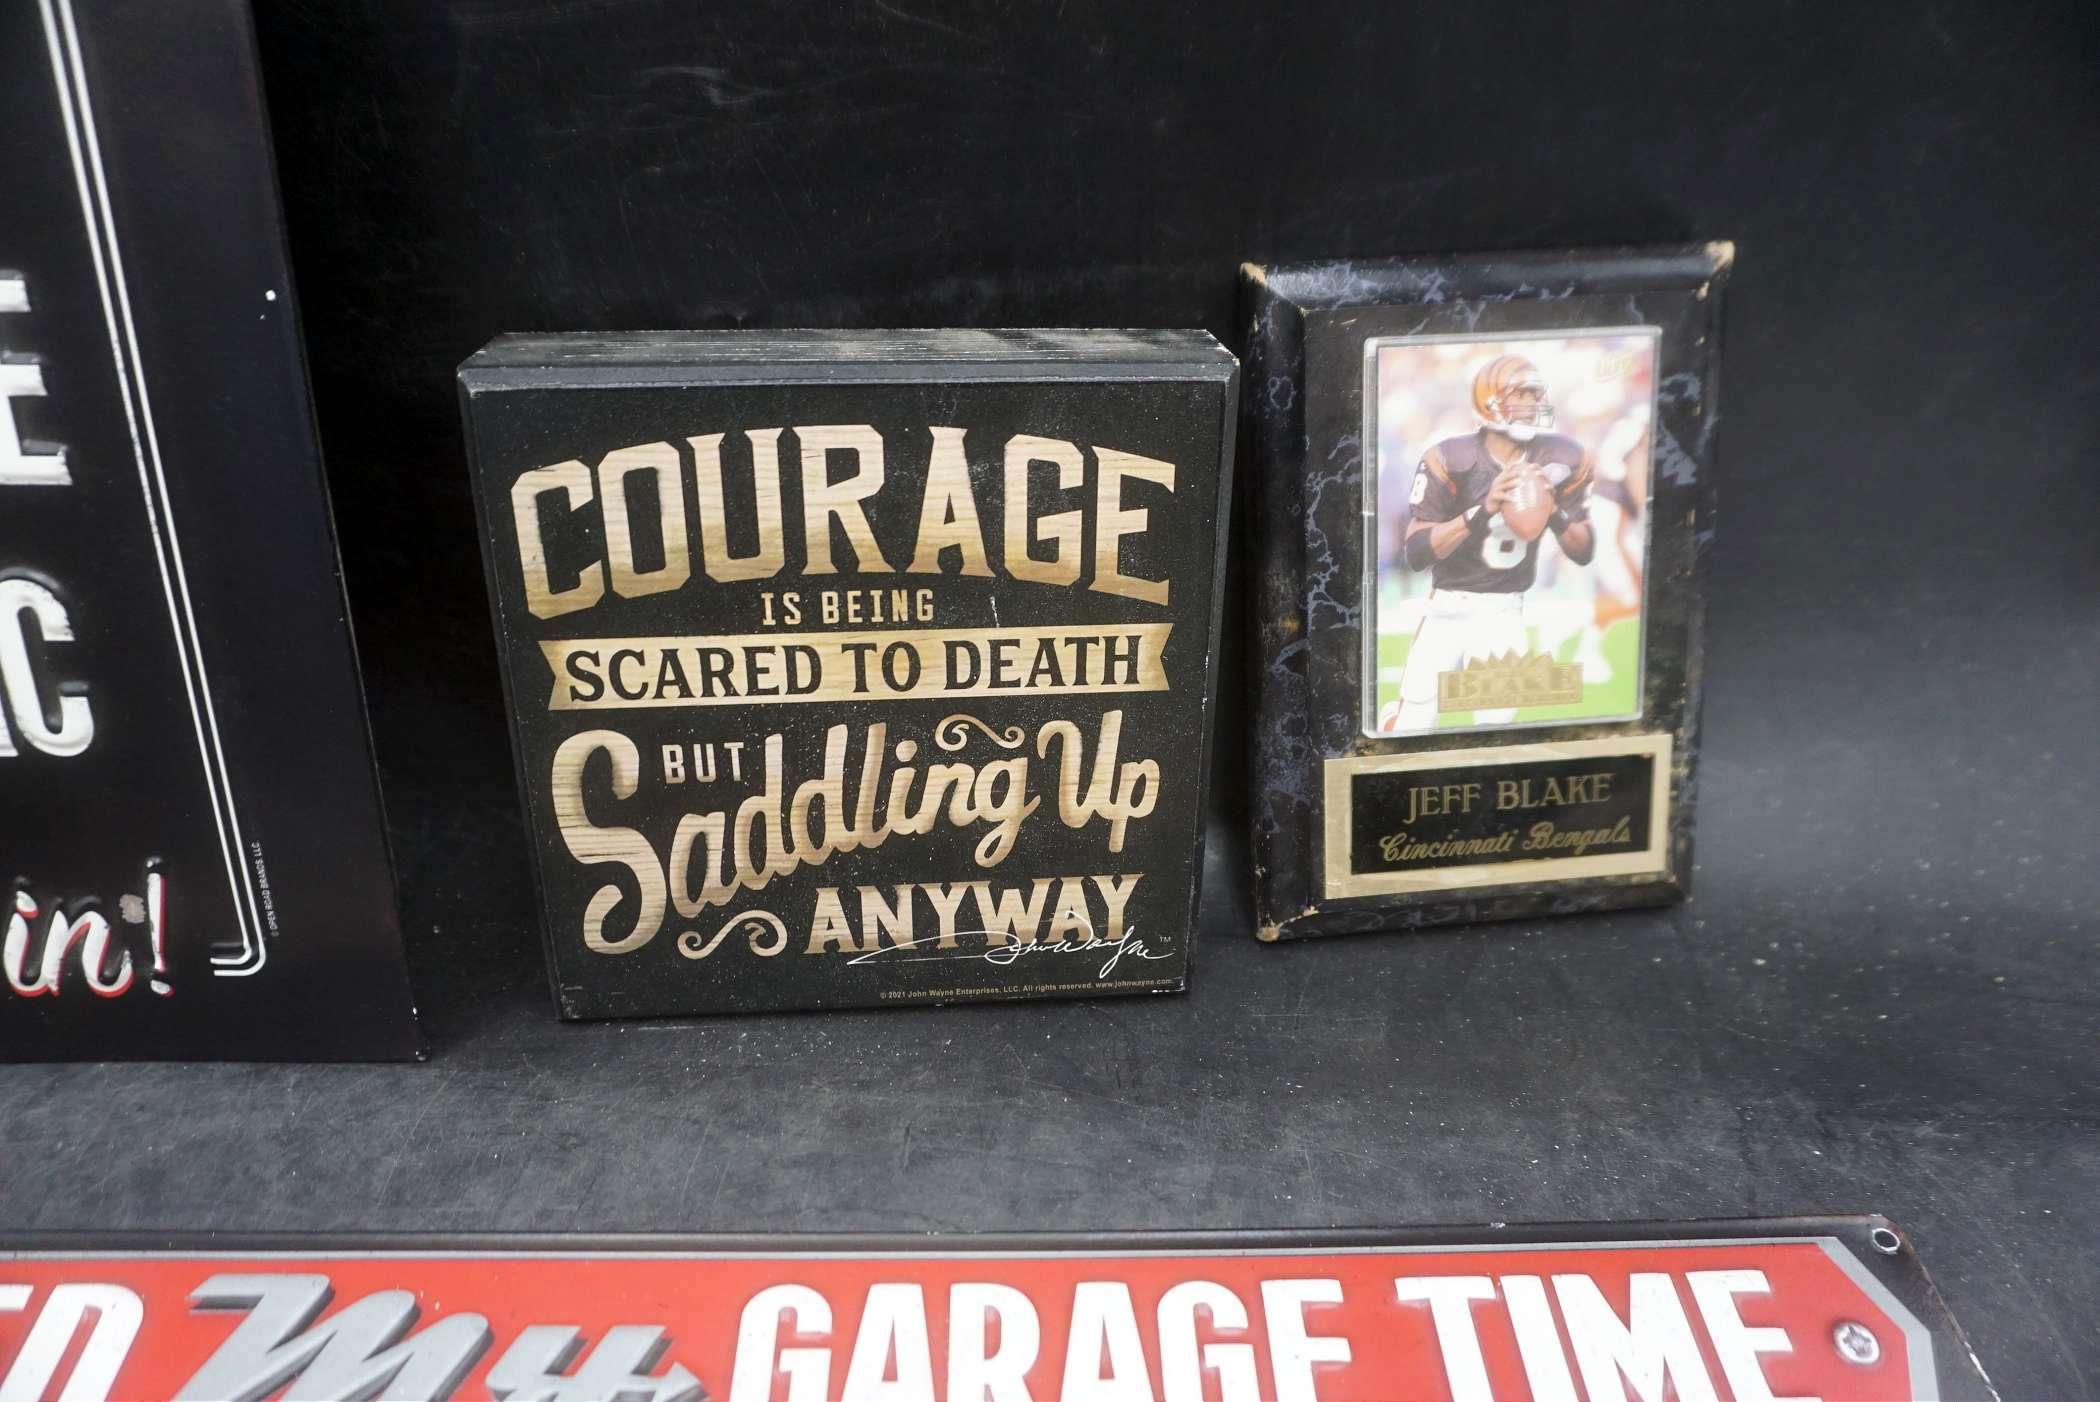 3 Signs & Jeff Blake Football Card Plaque